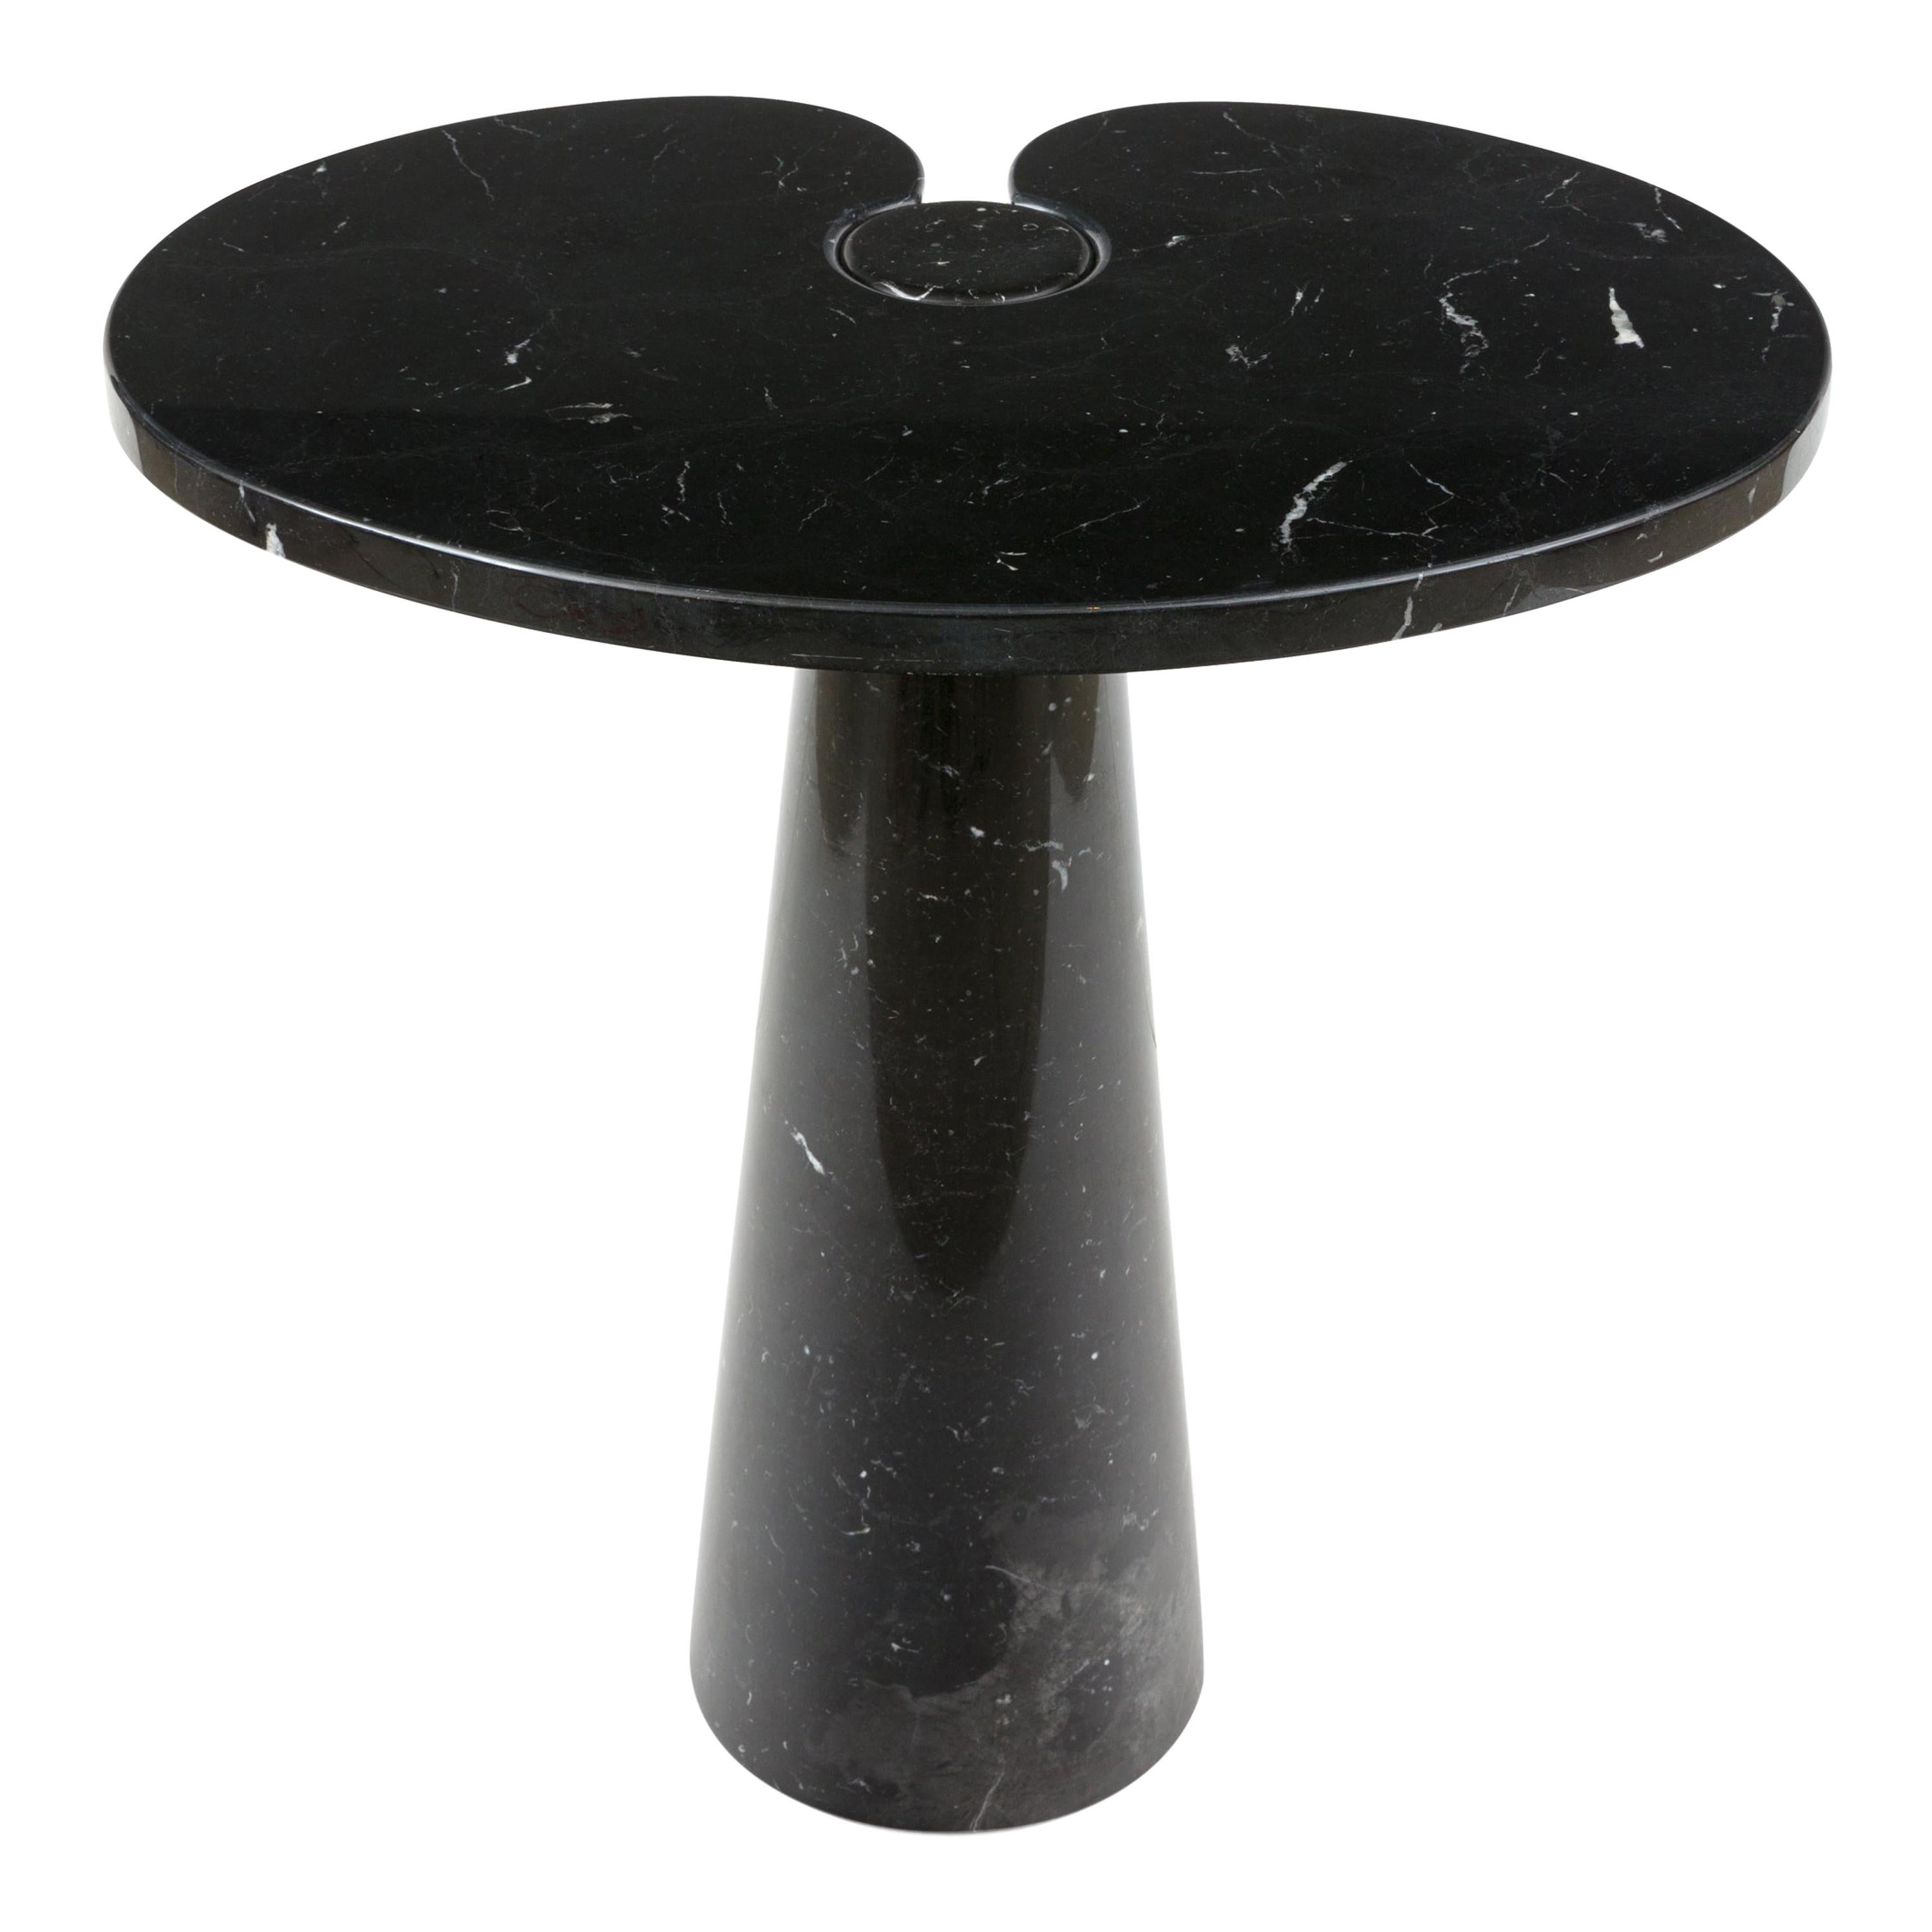 Angelo Mangiarotti Black Marquina Marble "Eros" Side Table for Skipper, Italy